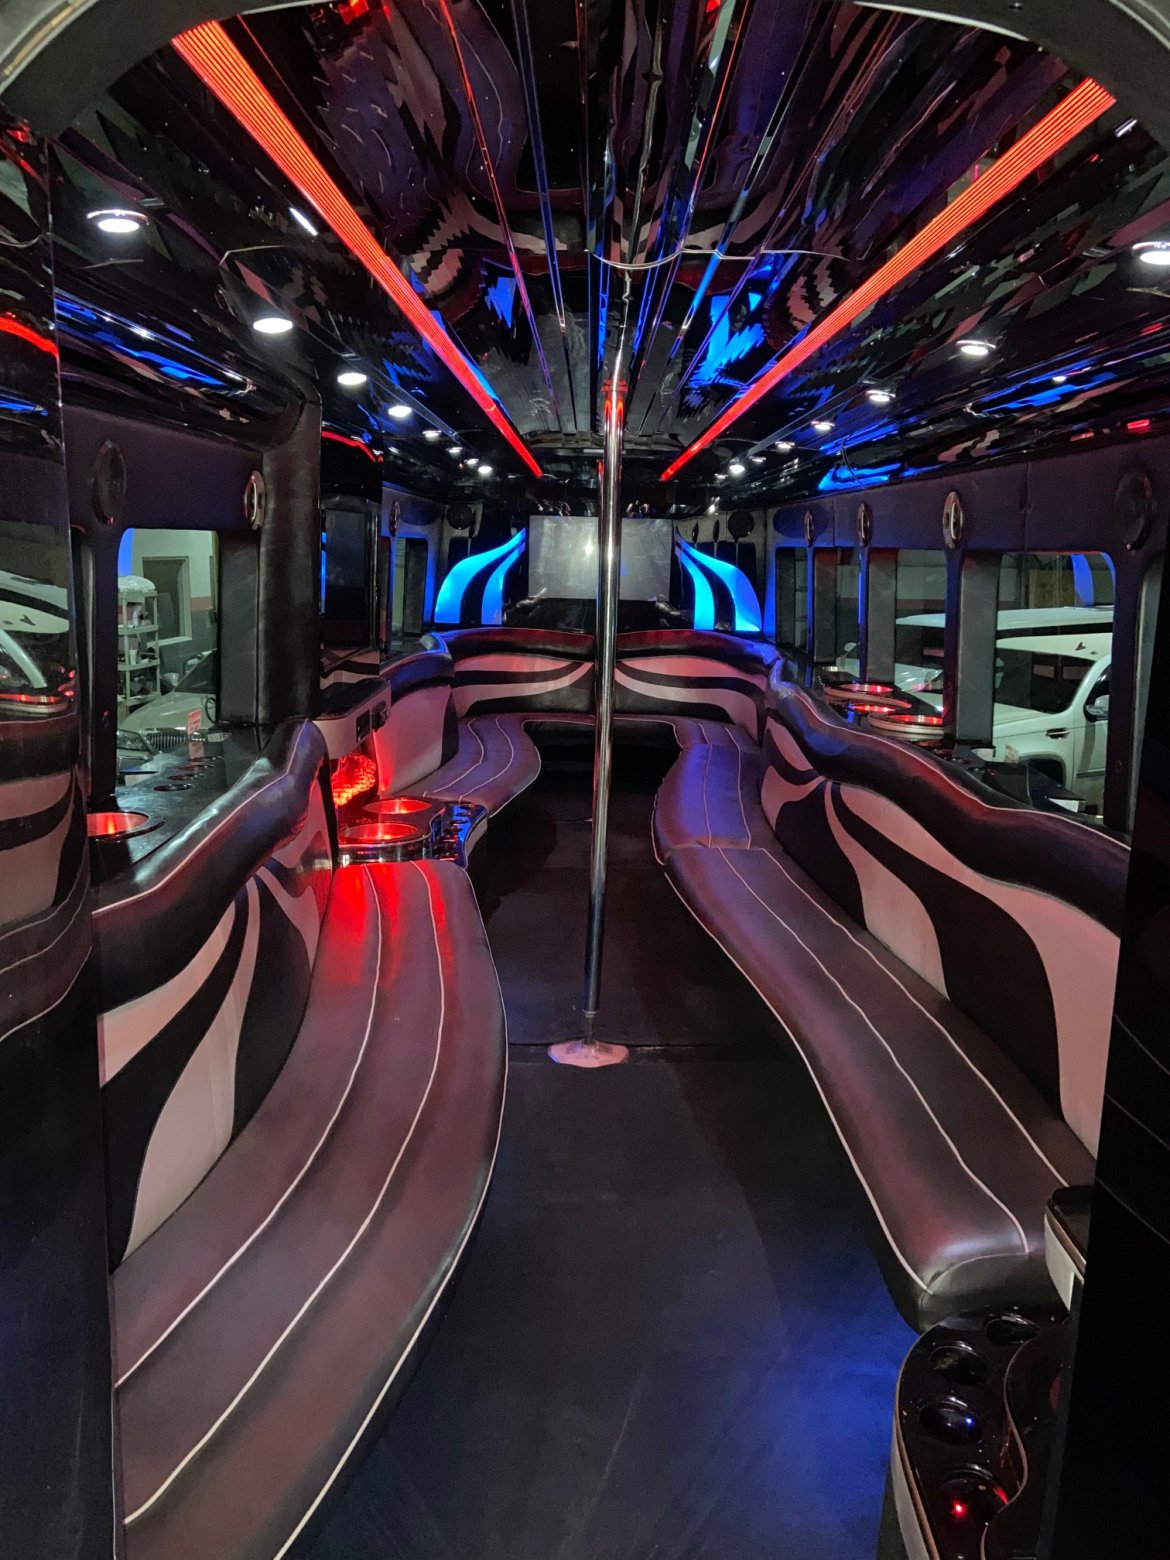 Limo Bus for sale: 2007 Freightliner Apollo 30 pass Limobus by Ultimate